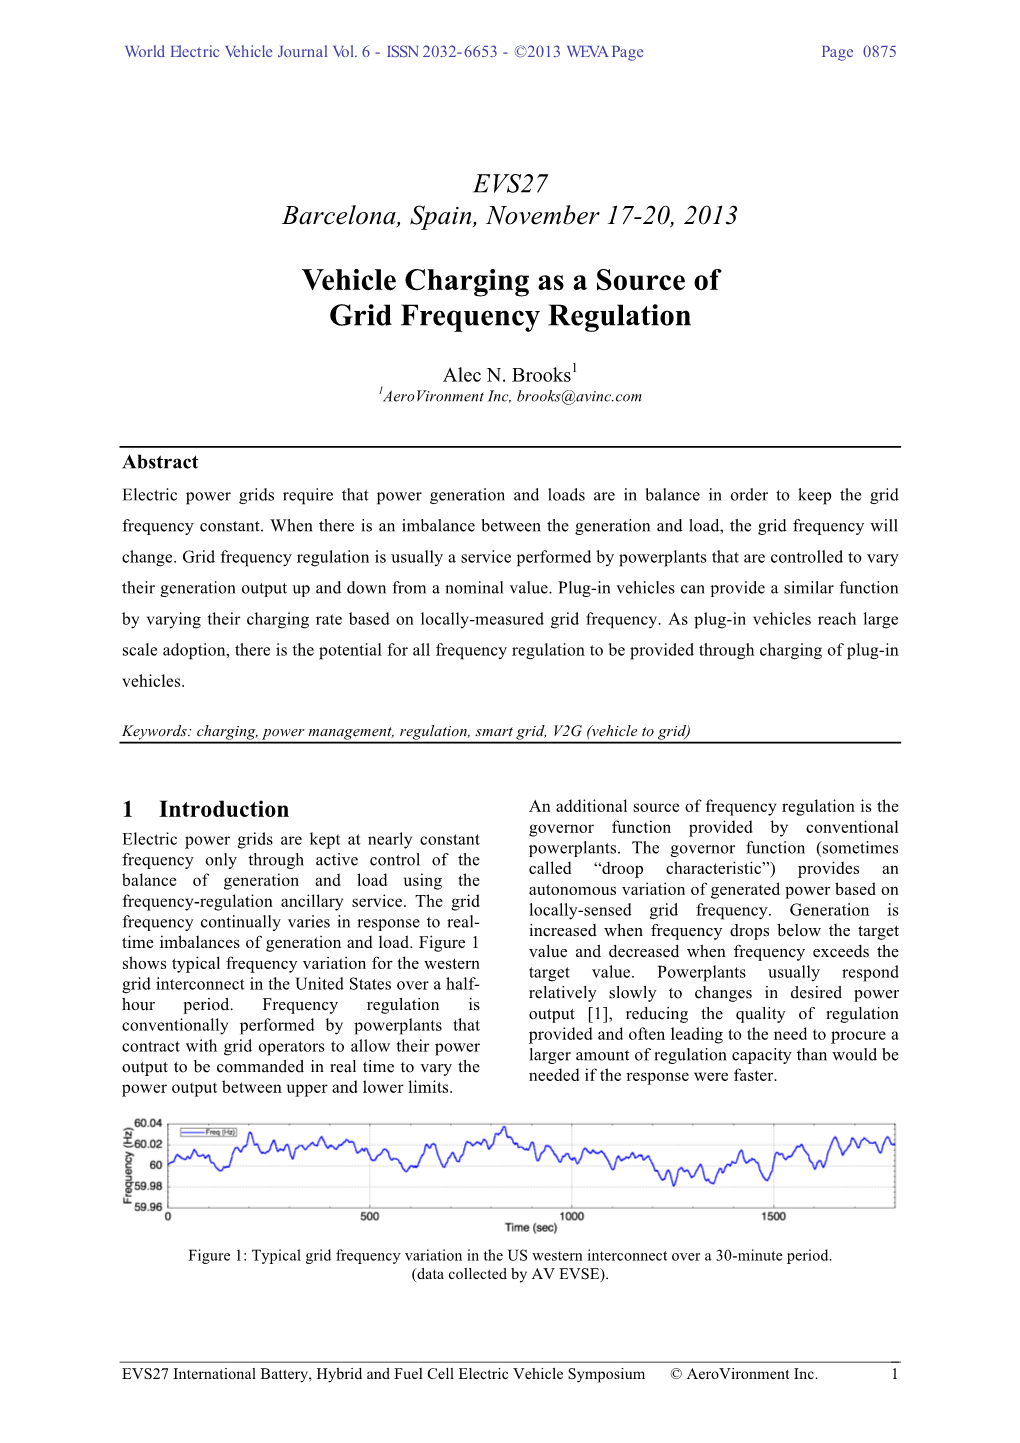 Vehicle Charging As a Source of Grid Frequency Regulation